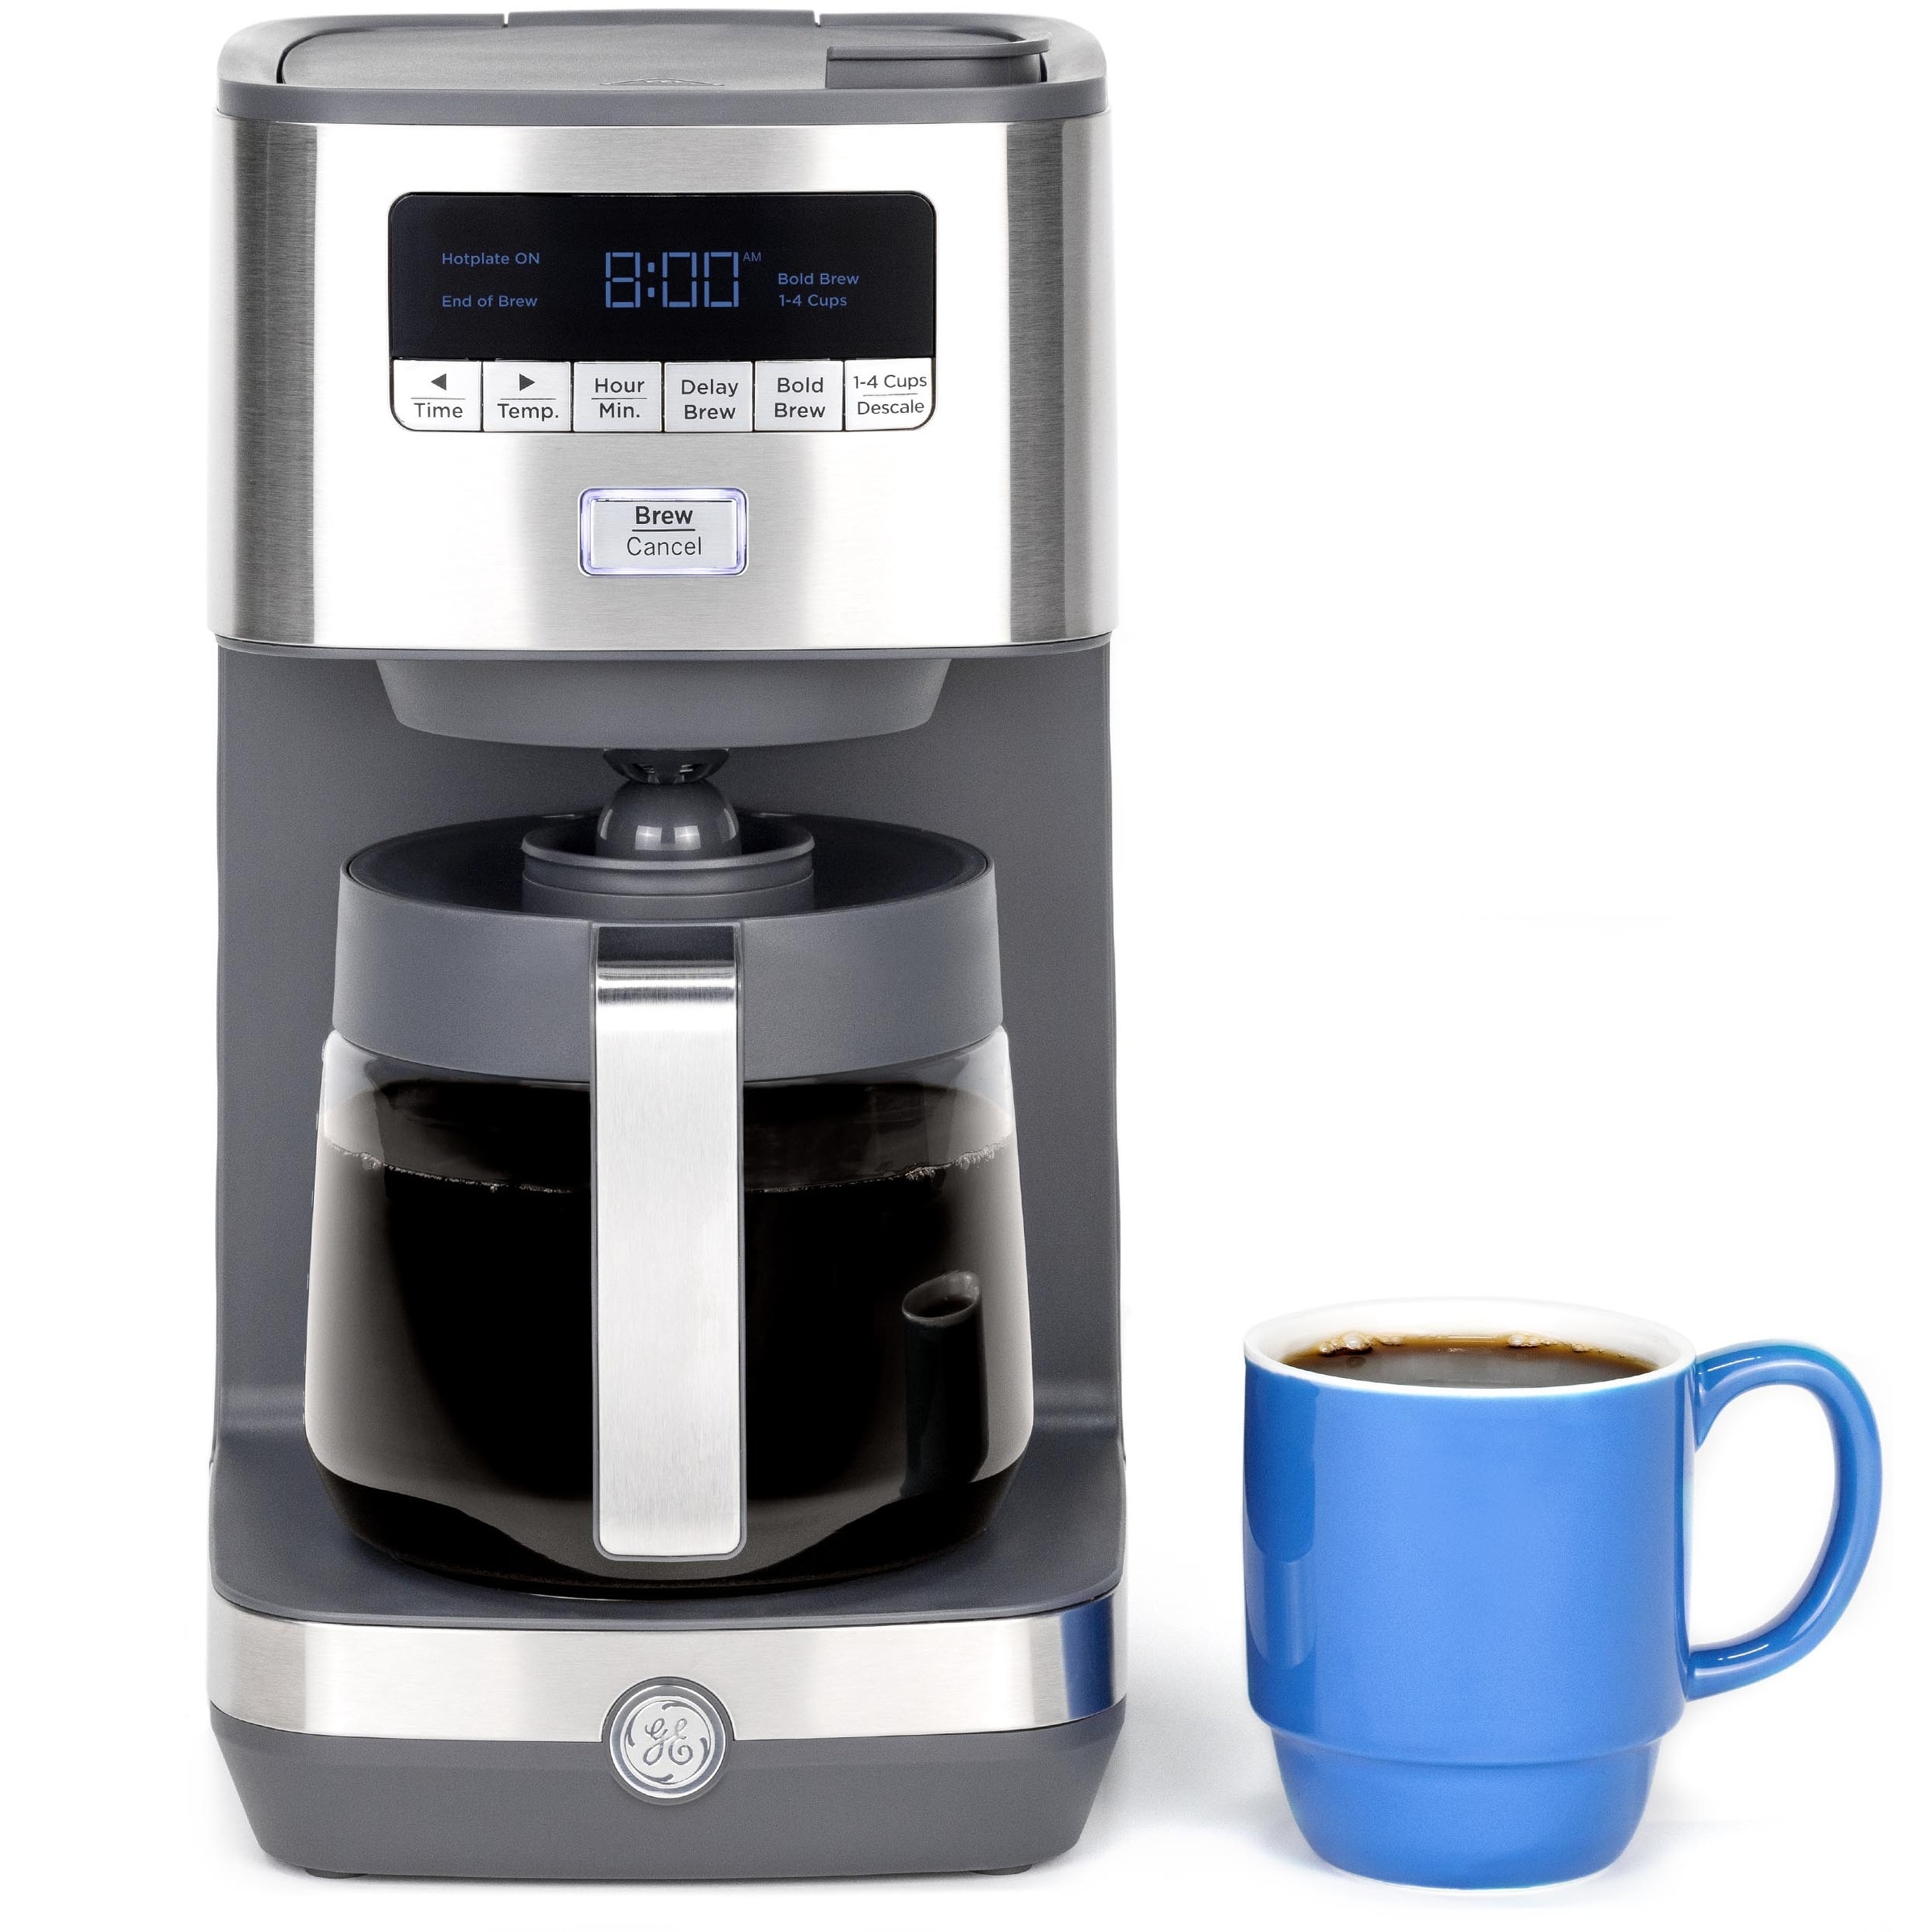 https://ak1.ostkcdn.com/images/products/is/images/direct/94867e03d545dbfa12b4ba5c69204a7d6af3f23d/GE-12-Cup-Drip-Coffee-Maker-with-Adjustable-Keep-Warm-Plate.jpg